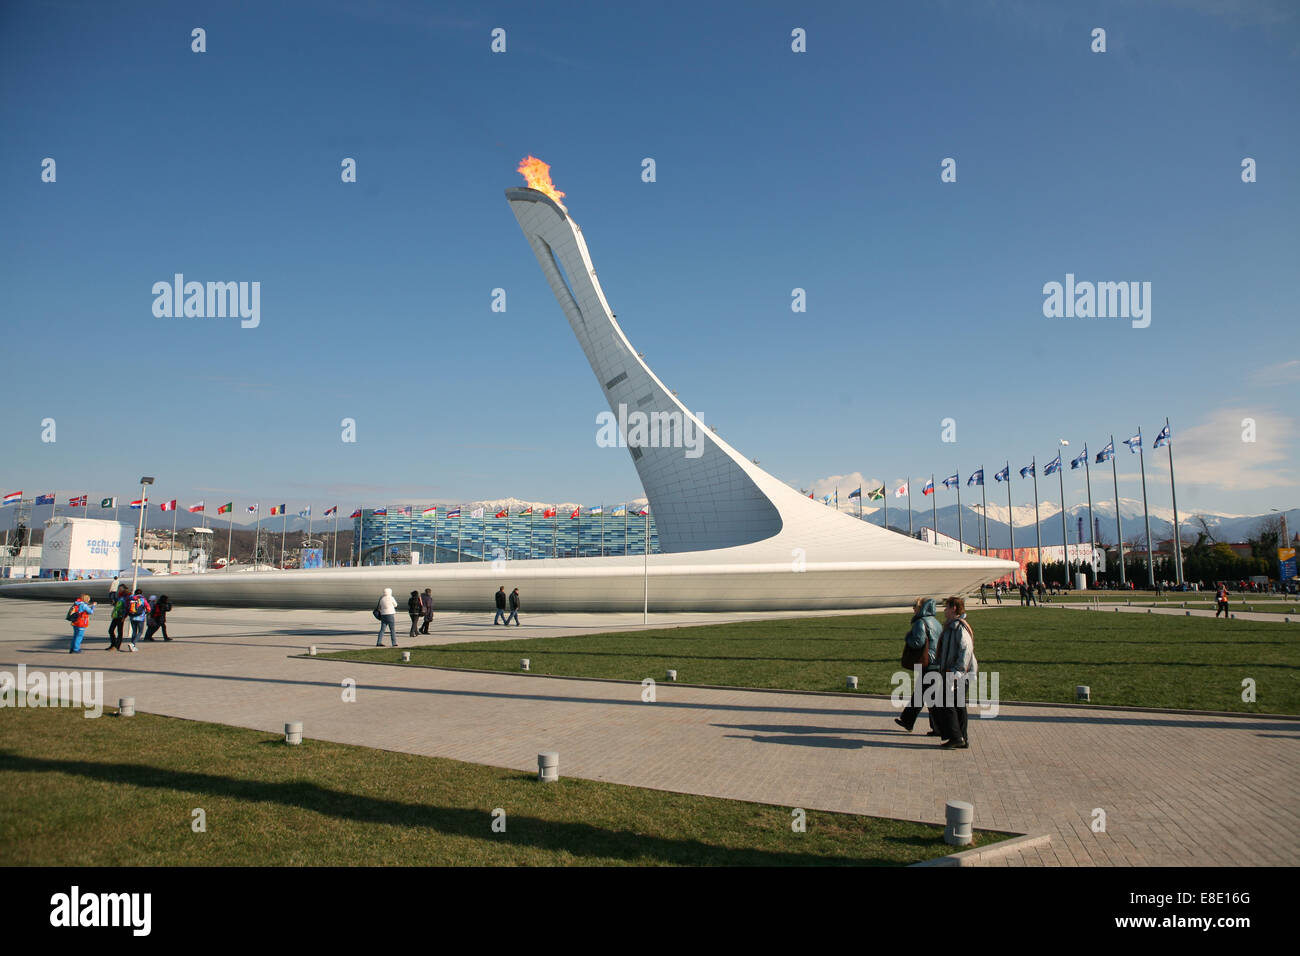 Sochi Medals Plaza Olympic Flame Winter Olympics Sochi 2014 Russia Stock Photo